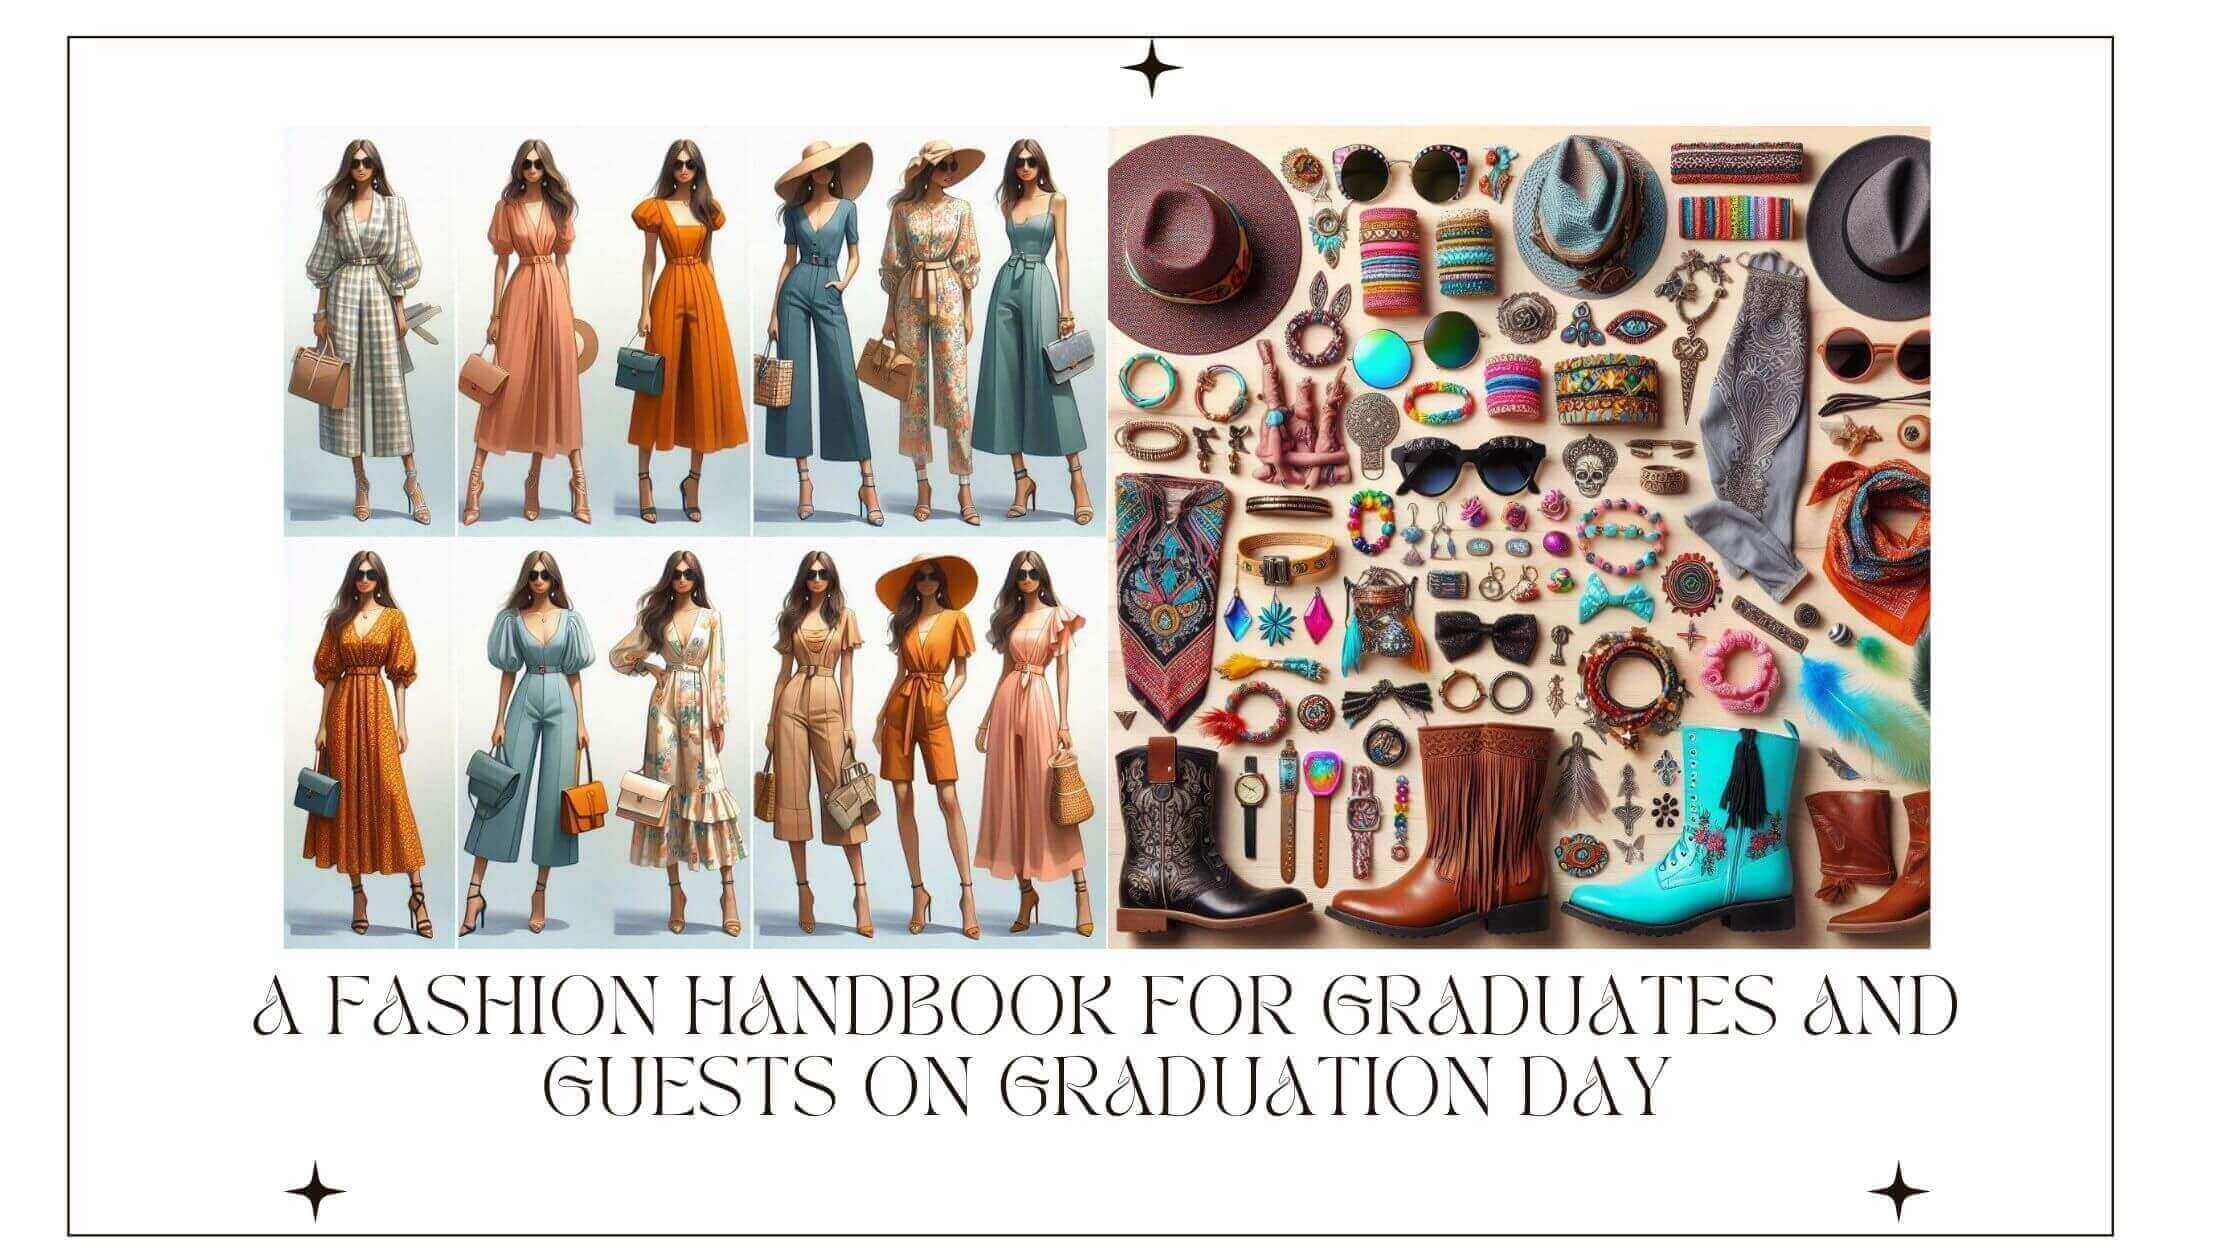 A Fashion Handbook for Graduates and Guests on Graduation Day